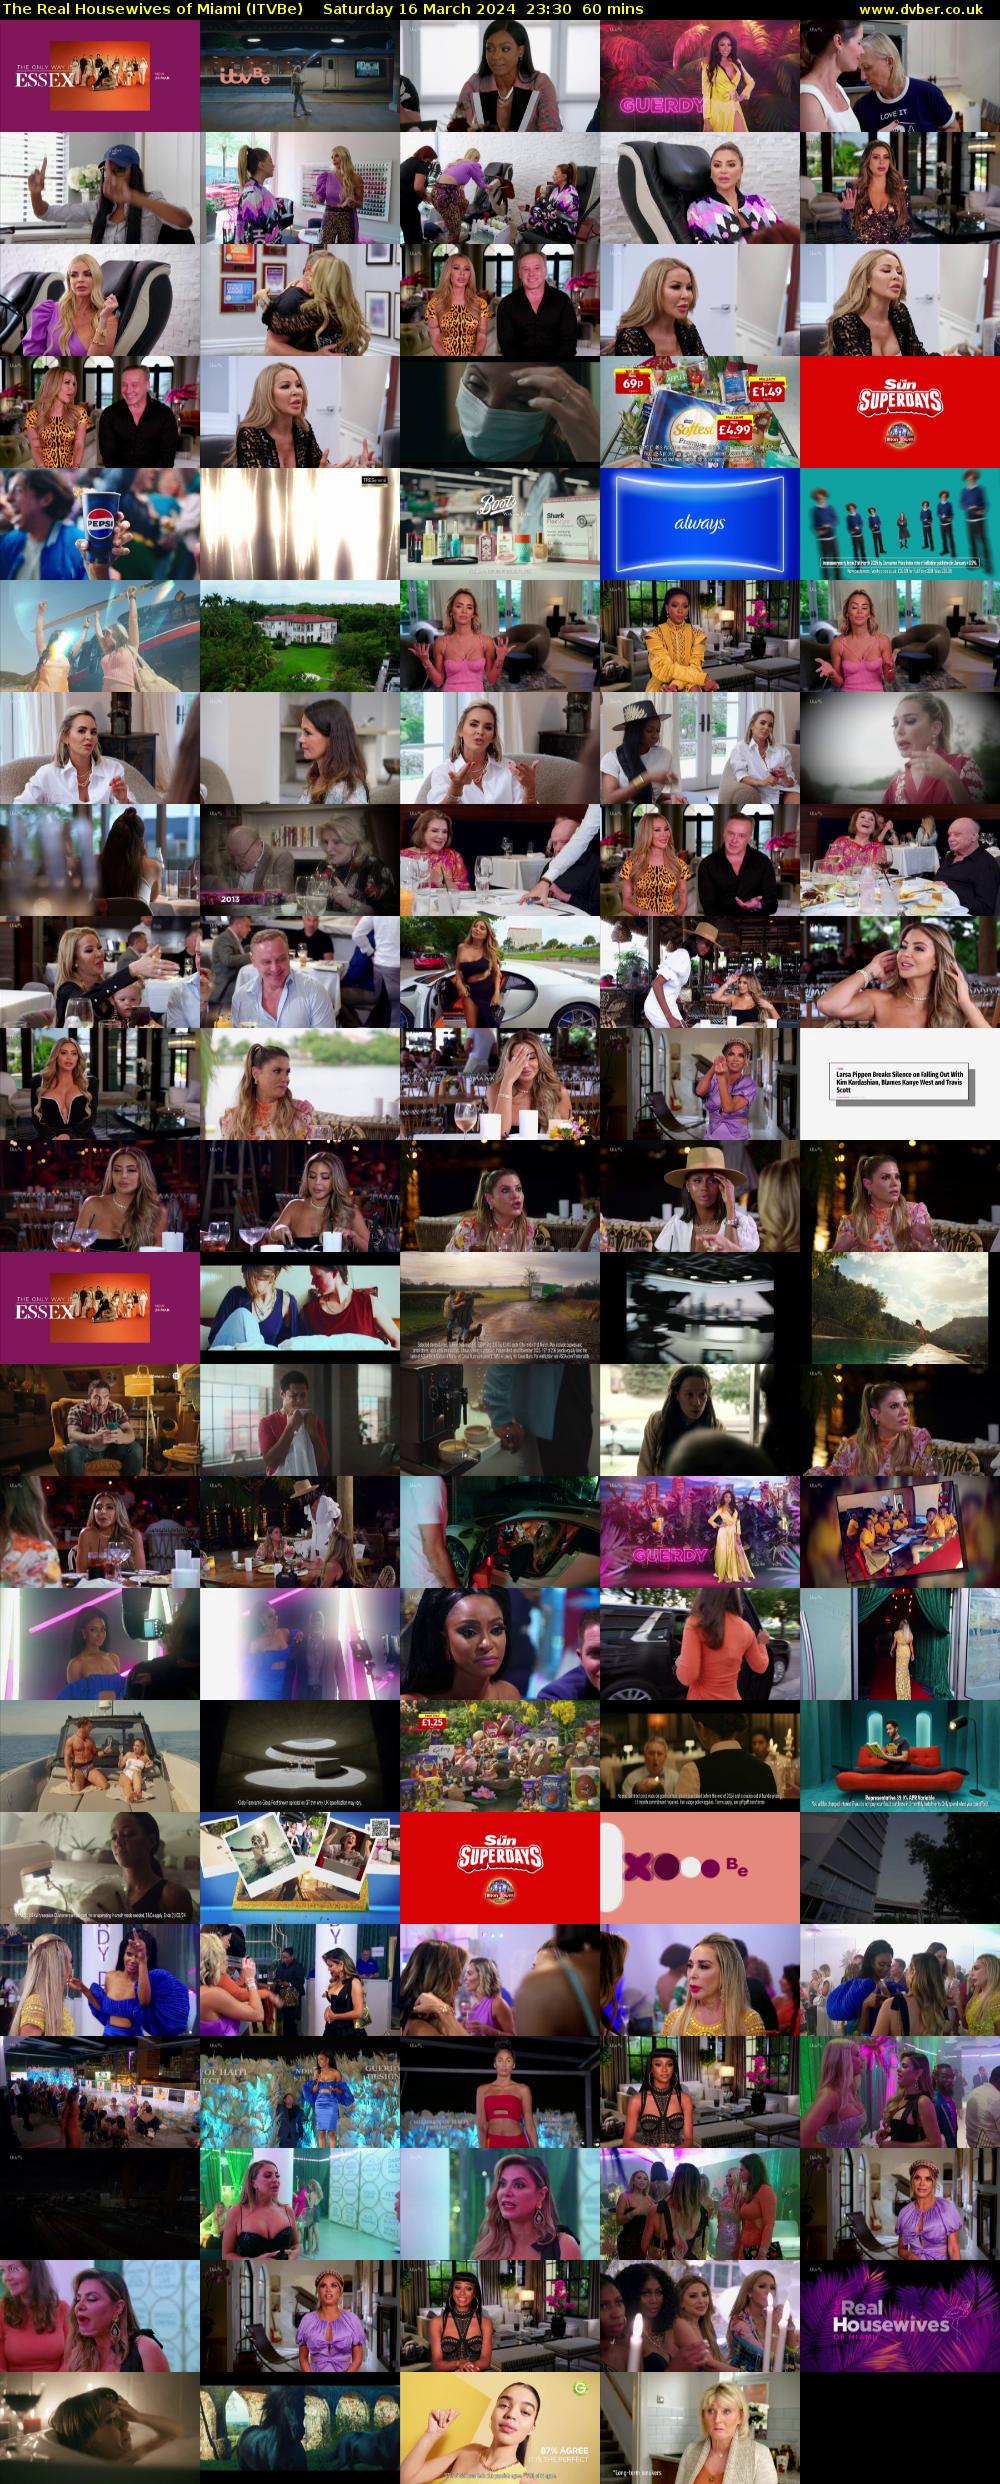 The Real Housewives of Miami (ITVBe) Saturday 16 March 2024 23:30 - 00:30